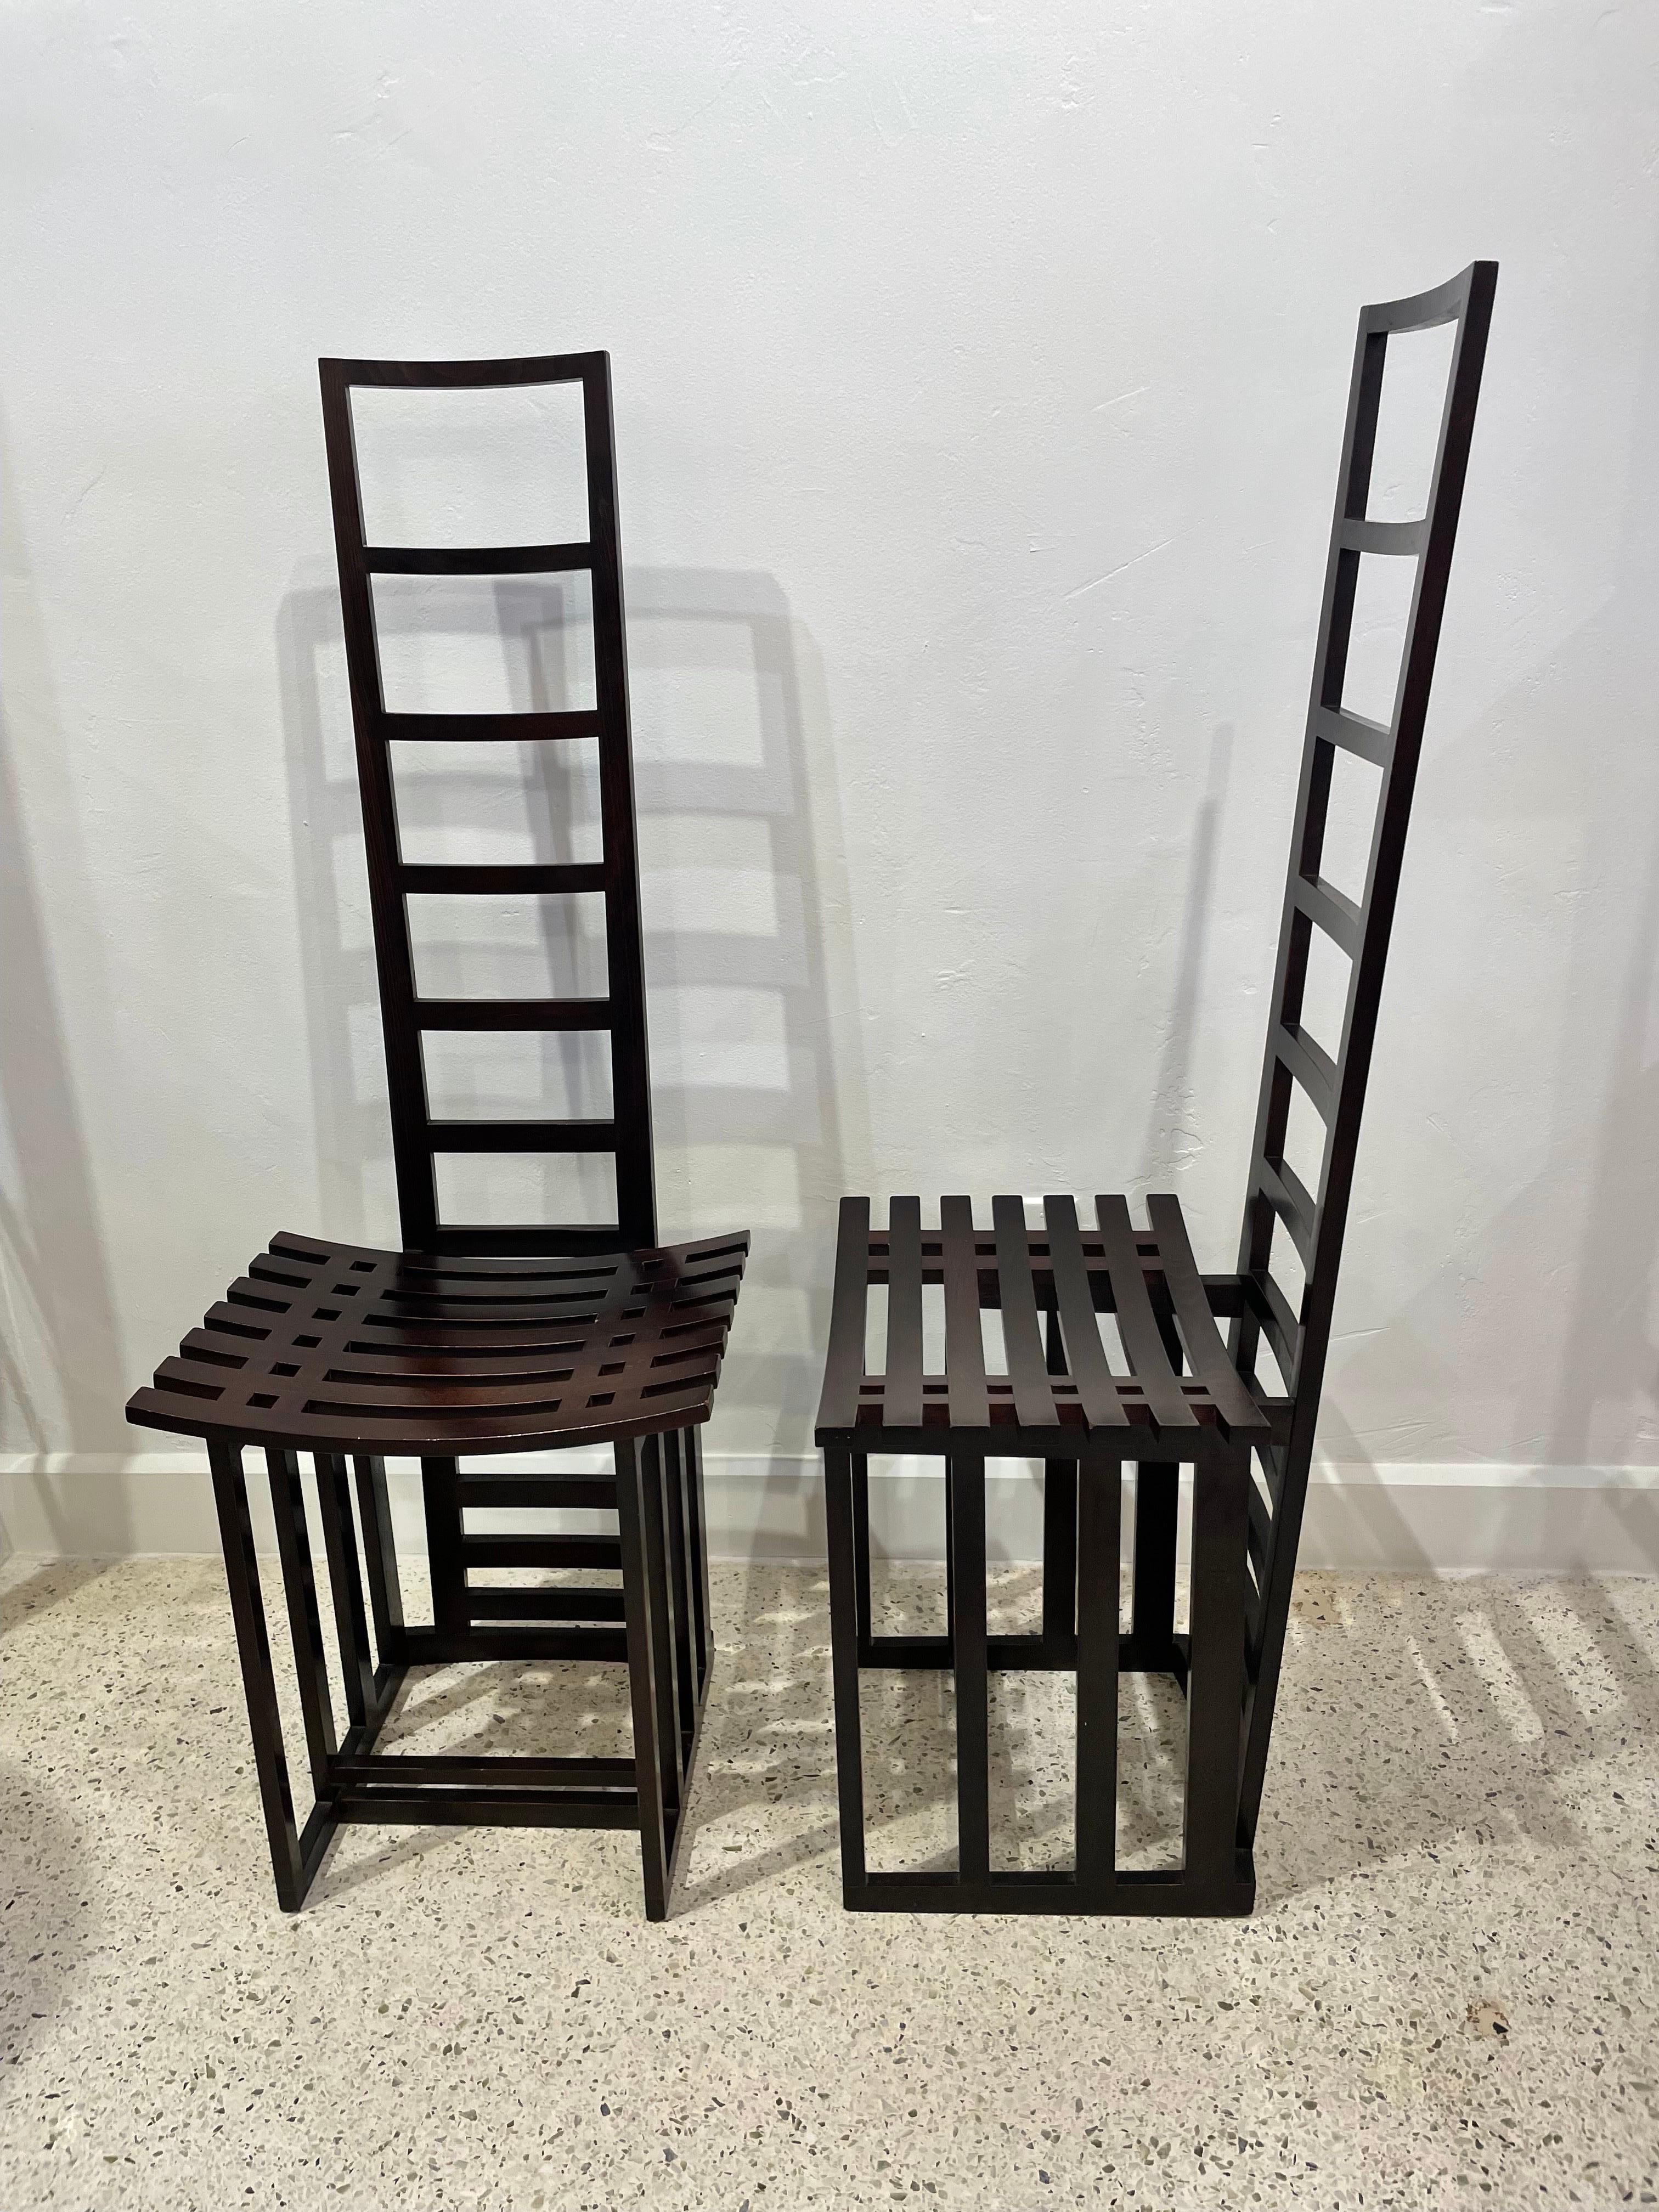 Post-Modern Tall Ladderback Architectural Design Chairs, Pair For Sale